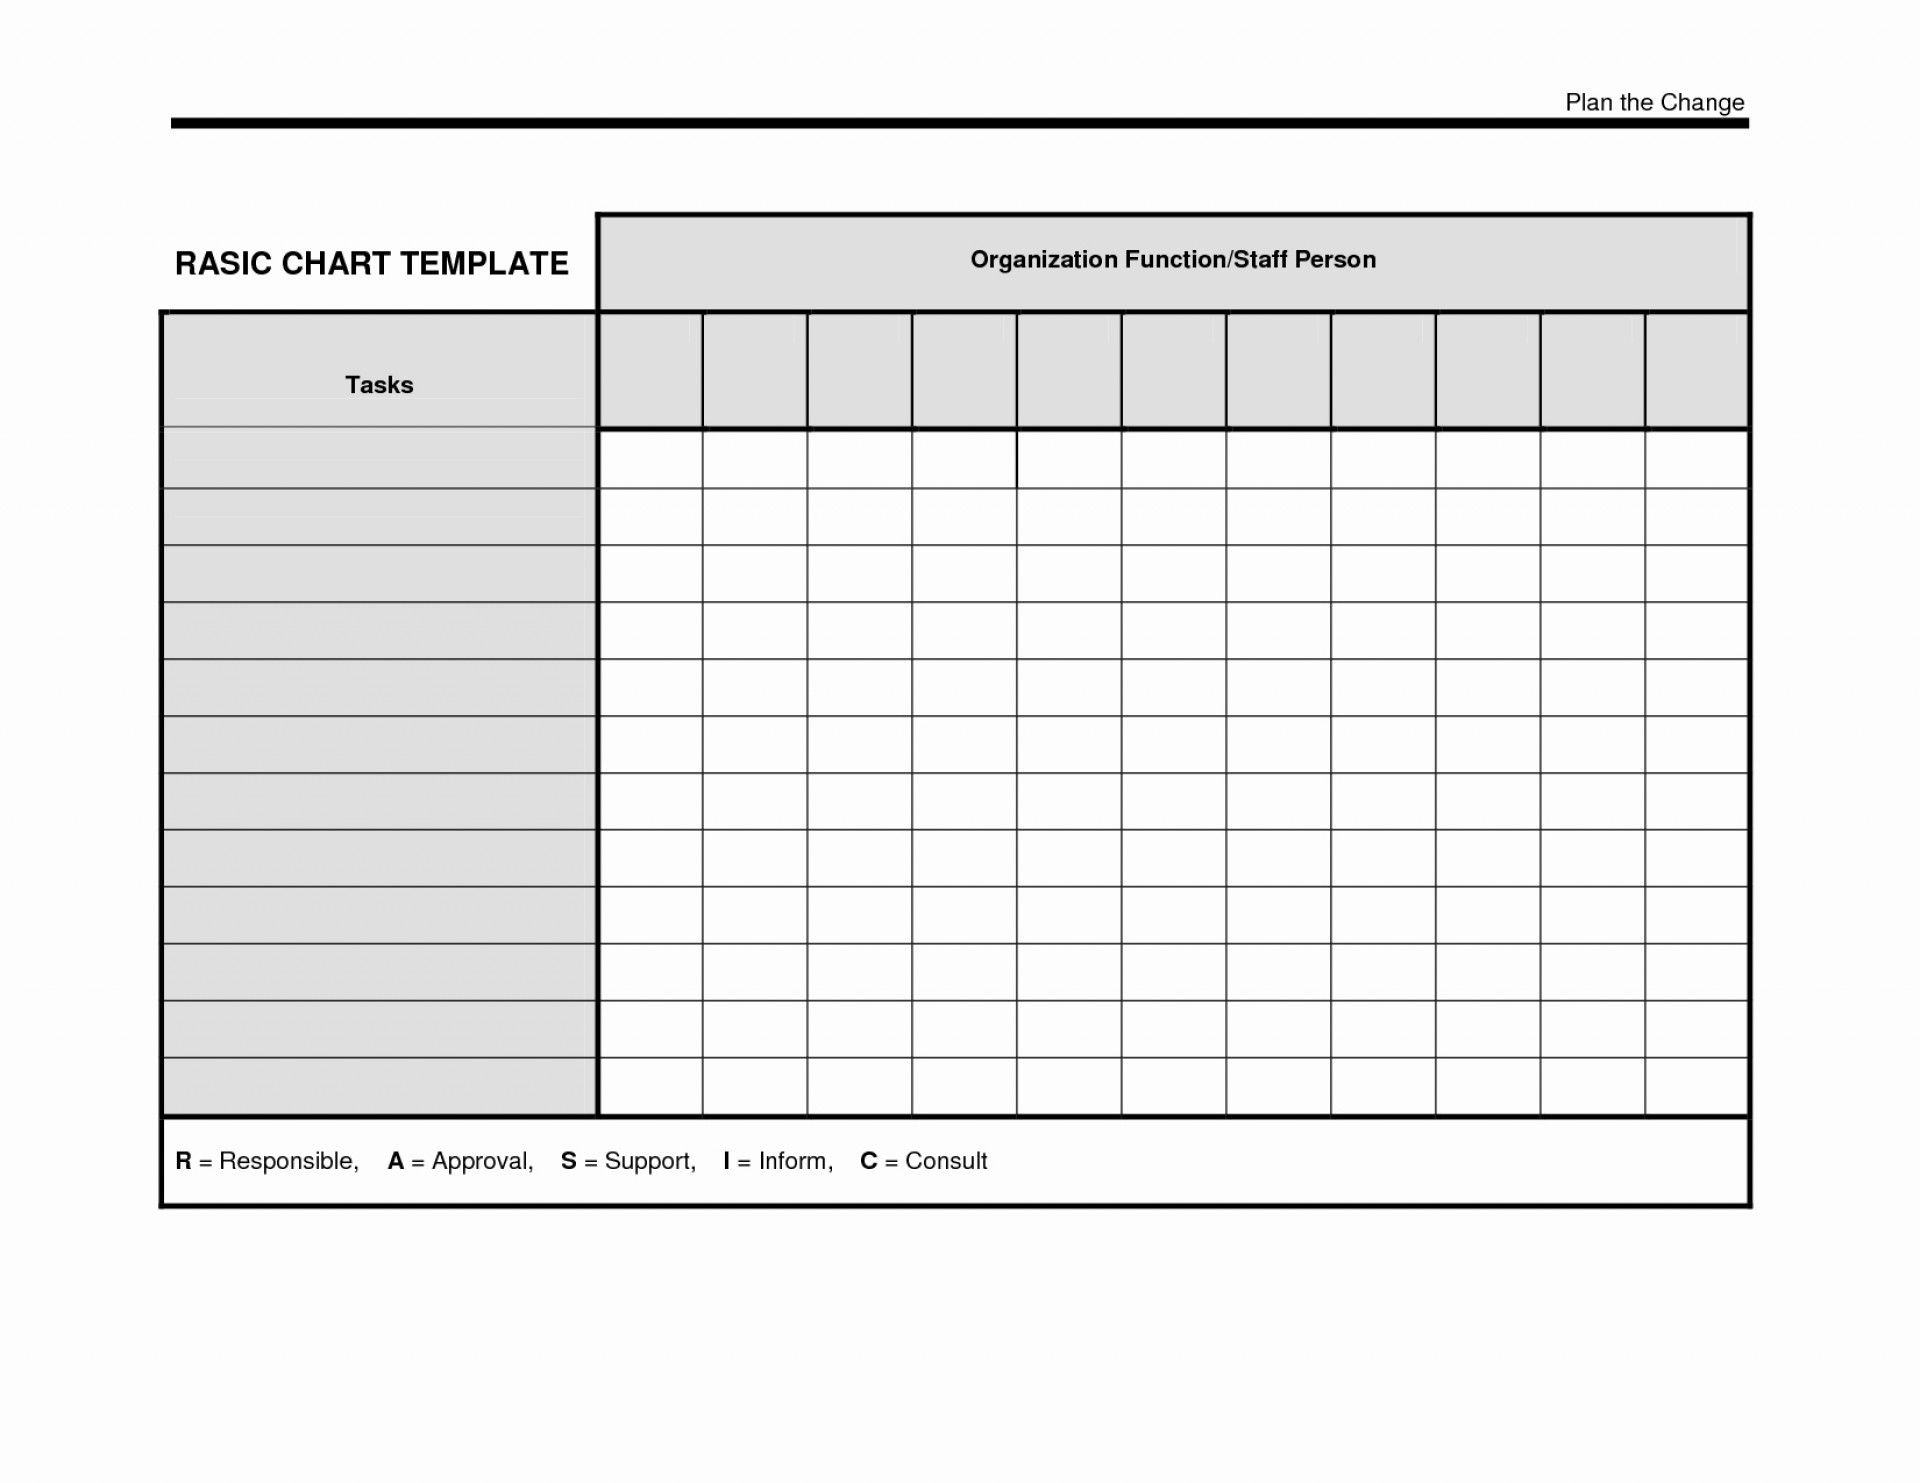 001 Free Blank Spreadsheet Templates Print For Printable Charts Make It